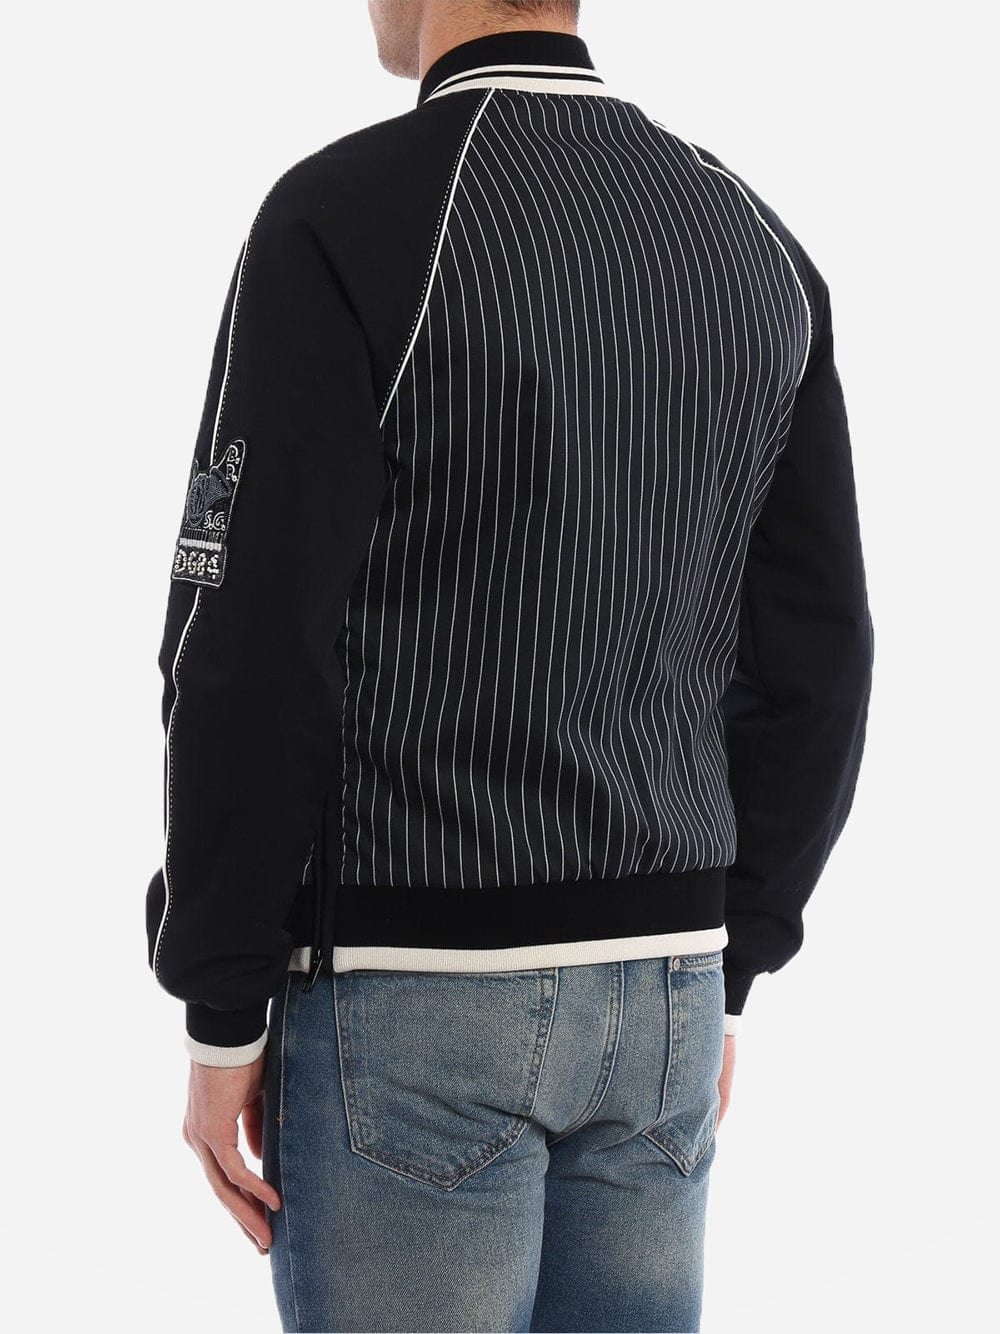 Dolce & Gabbana Pinstriped Musical Patches Bomber Jacket